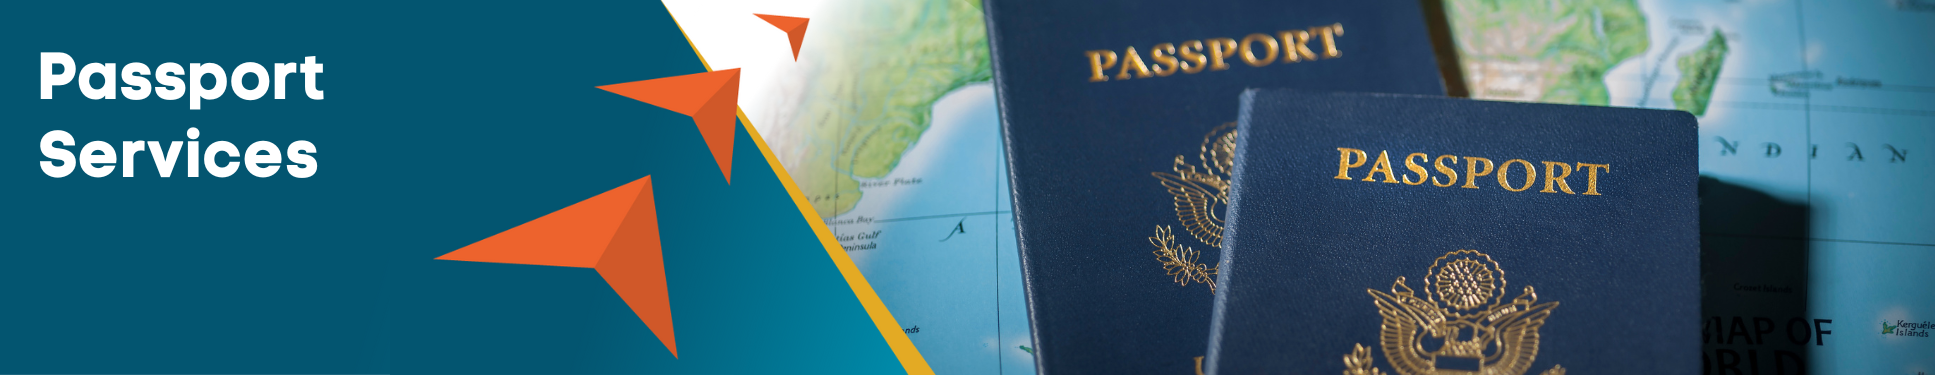 Passport Services banner with orange arrows pointing to image of passport books on map.